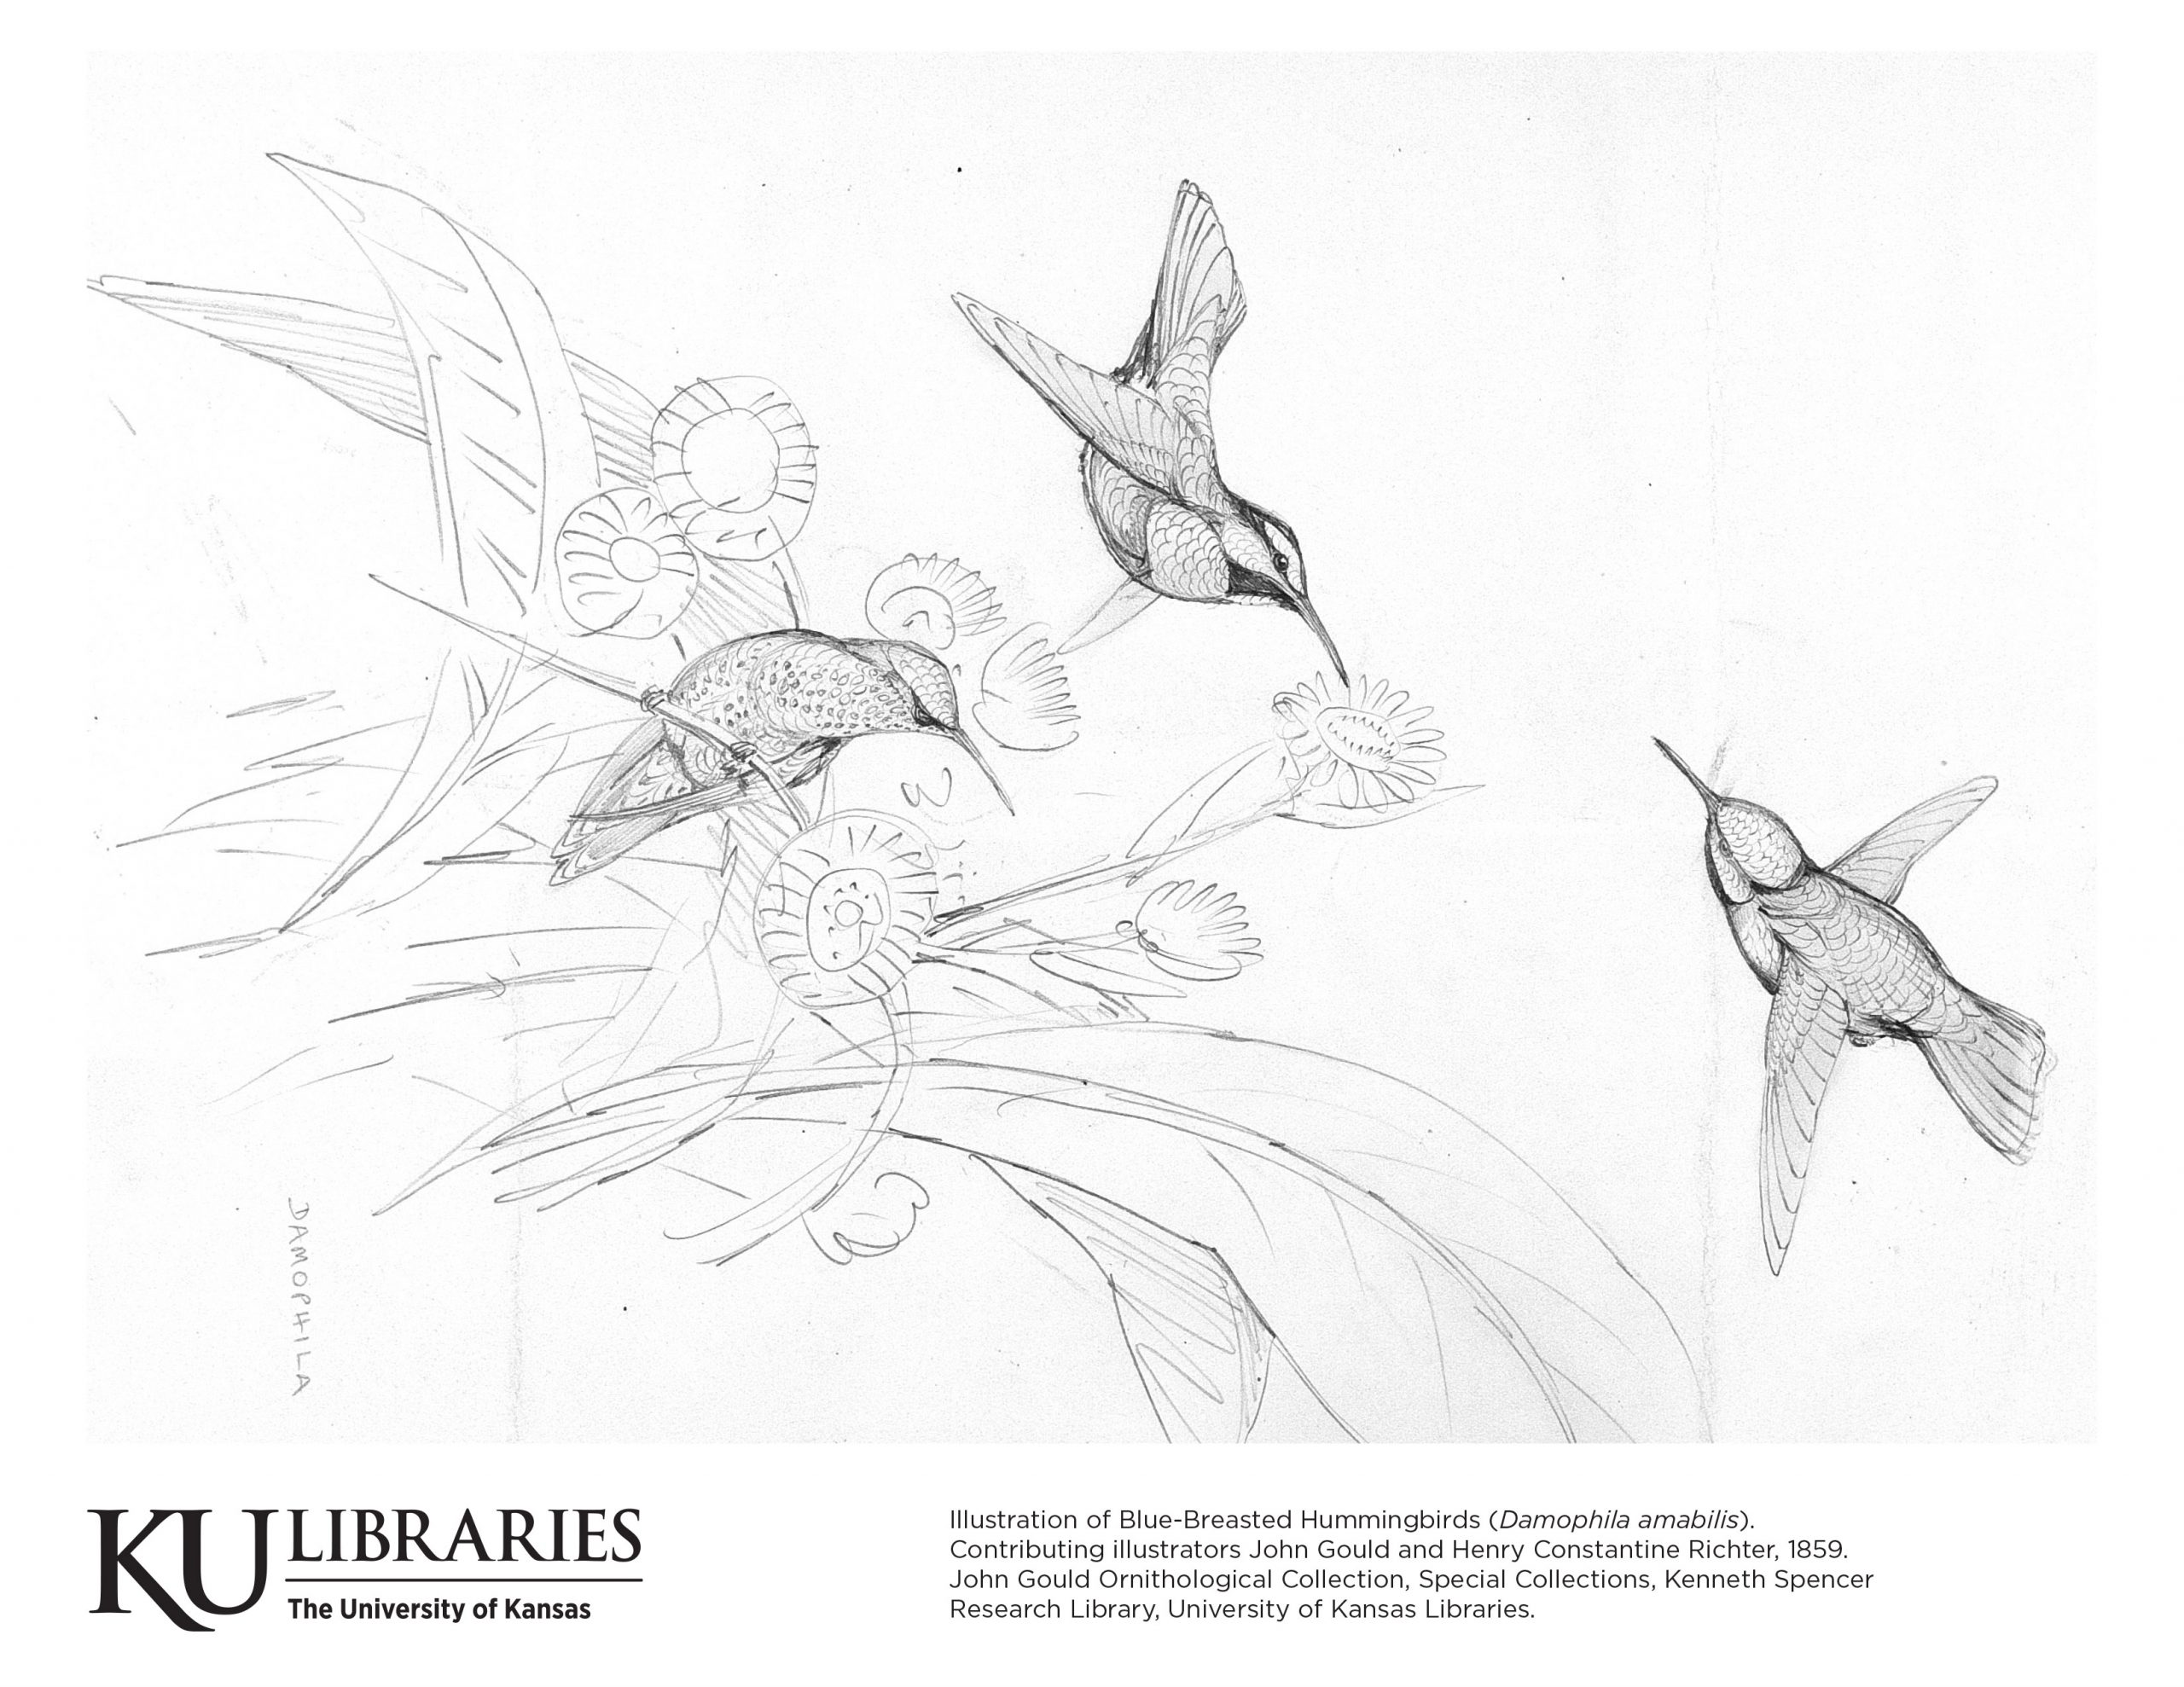 Kenneth Spencer Research Library Blog » John Gould Ornithological Collection image